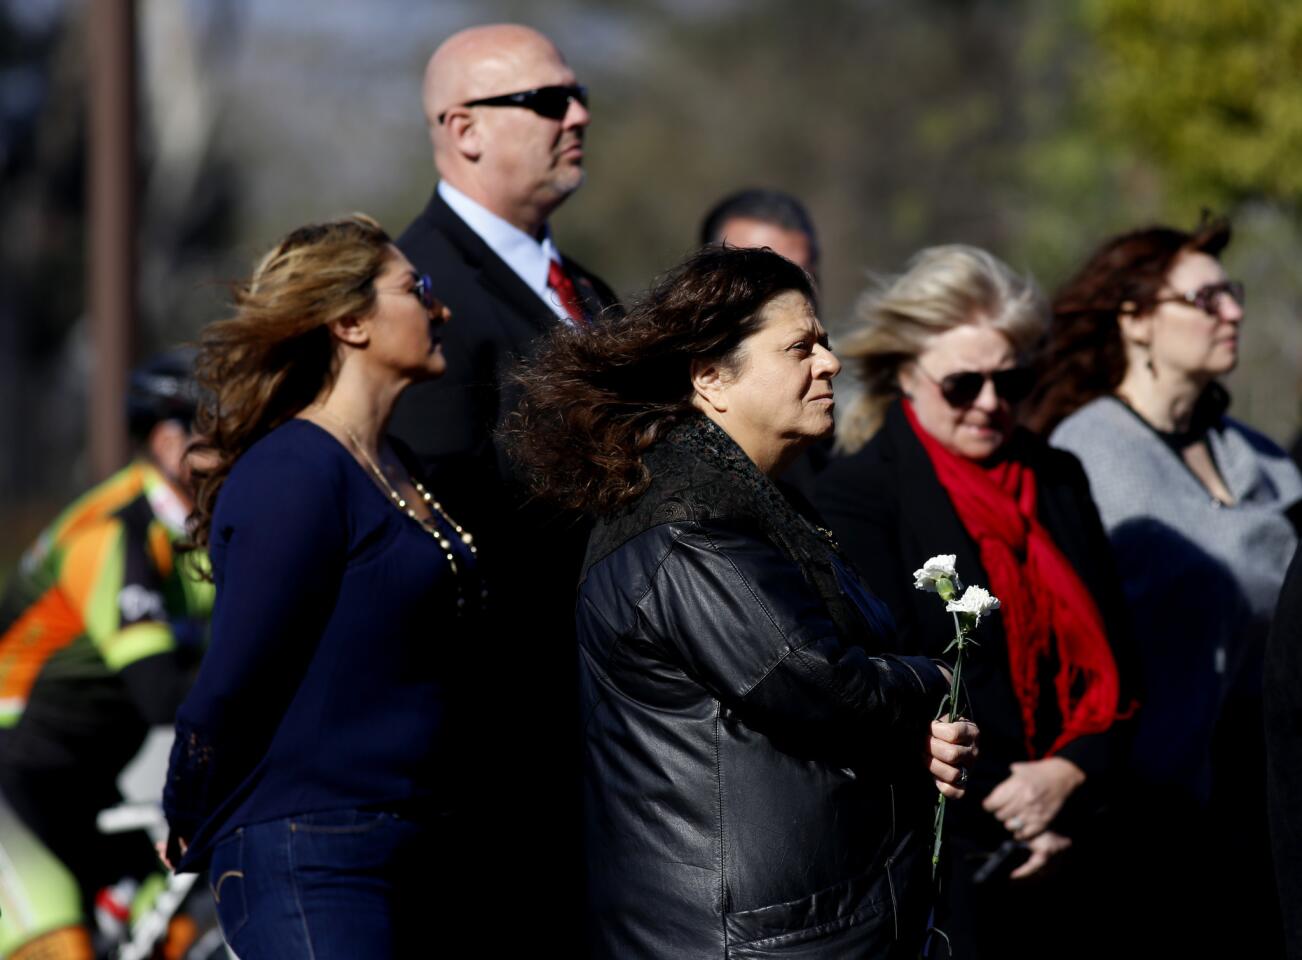 Remembrance ceremonies in San Bernardino one year after terror attack